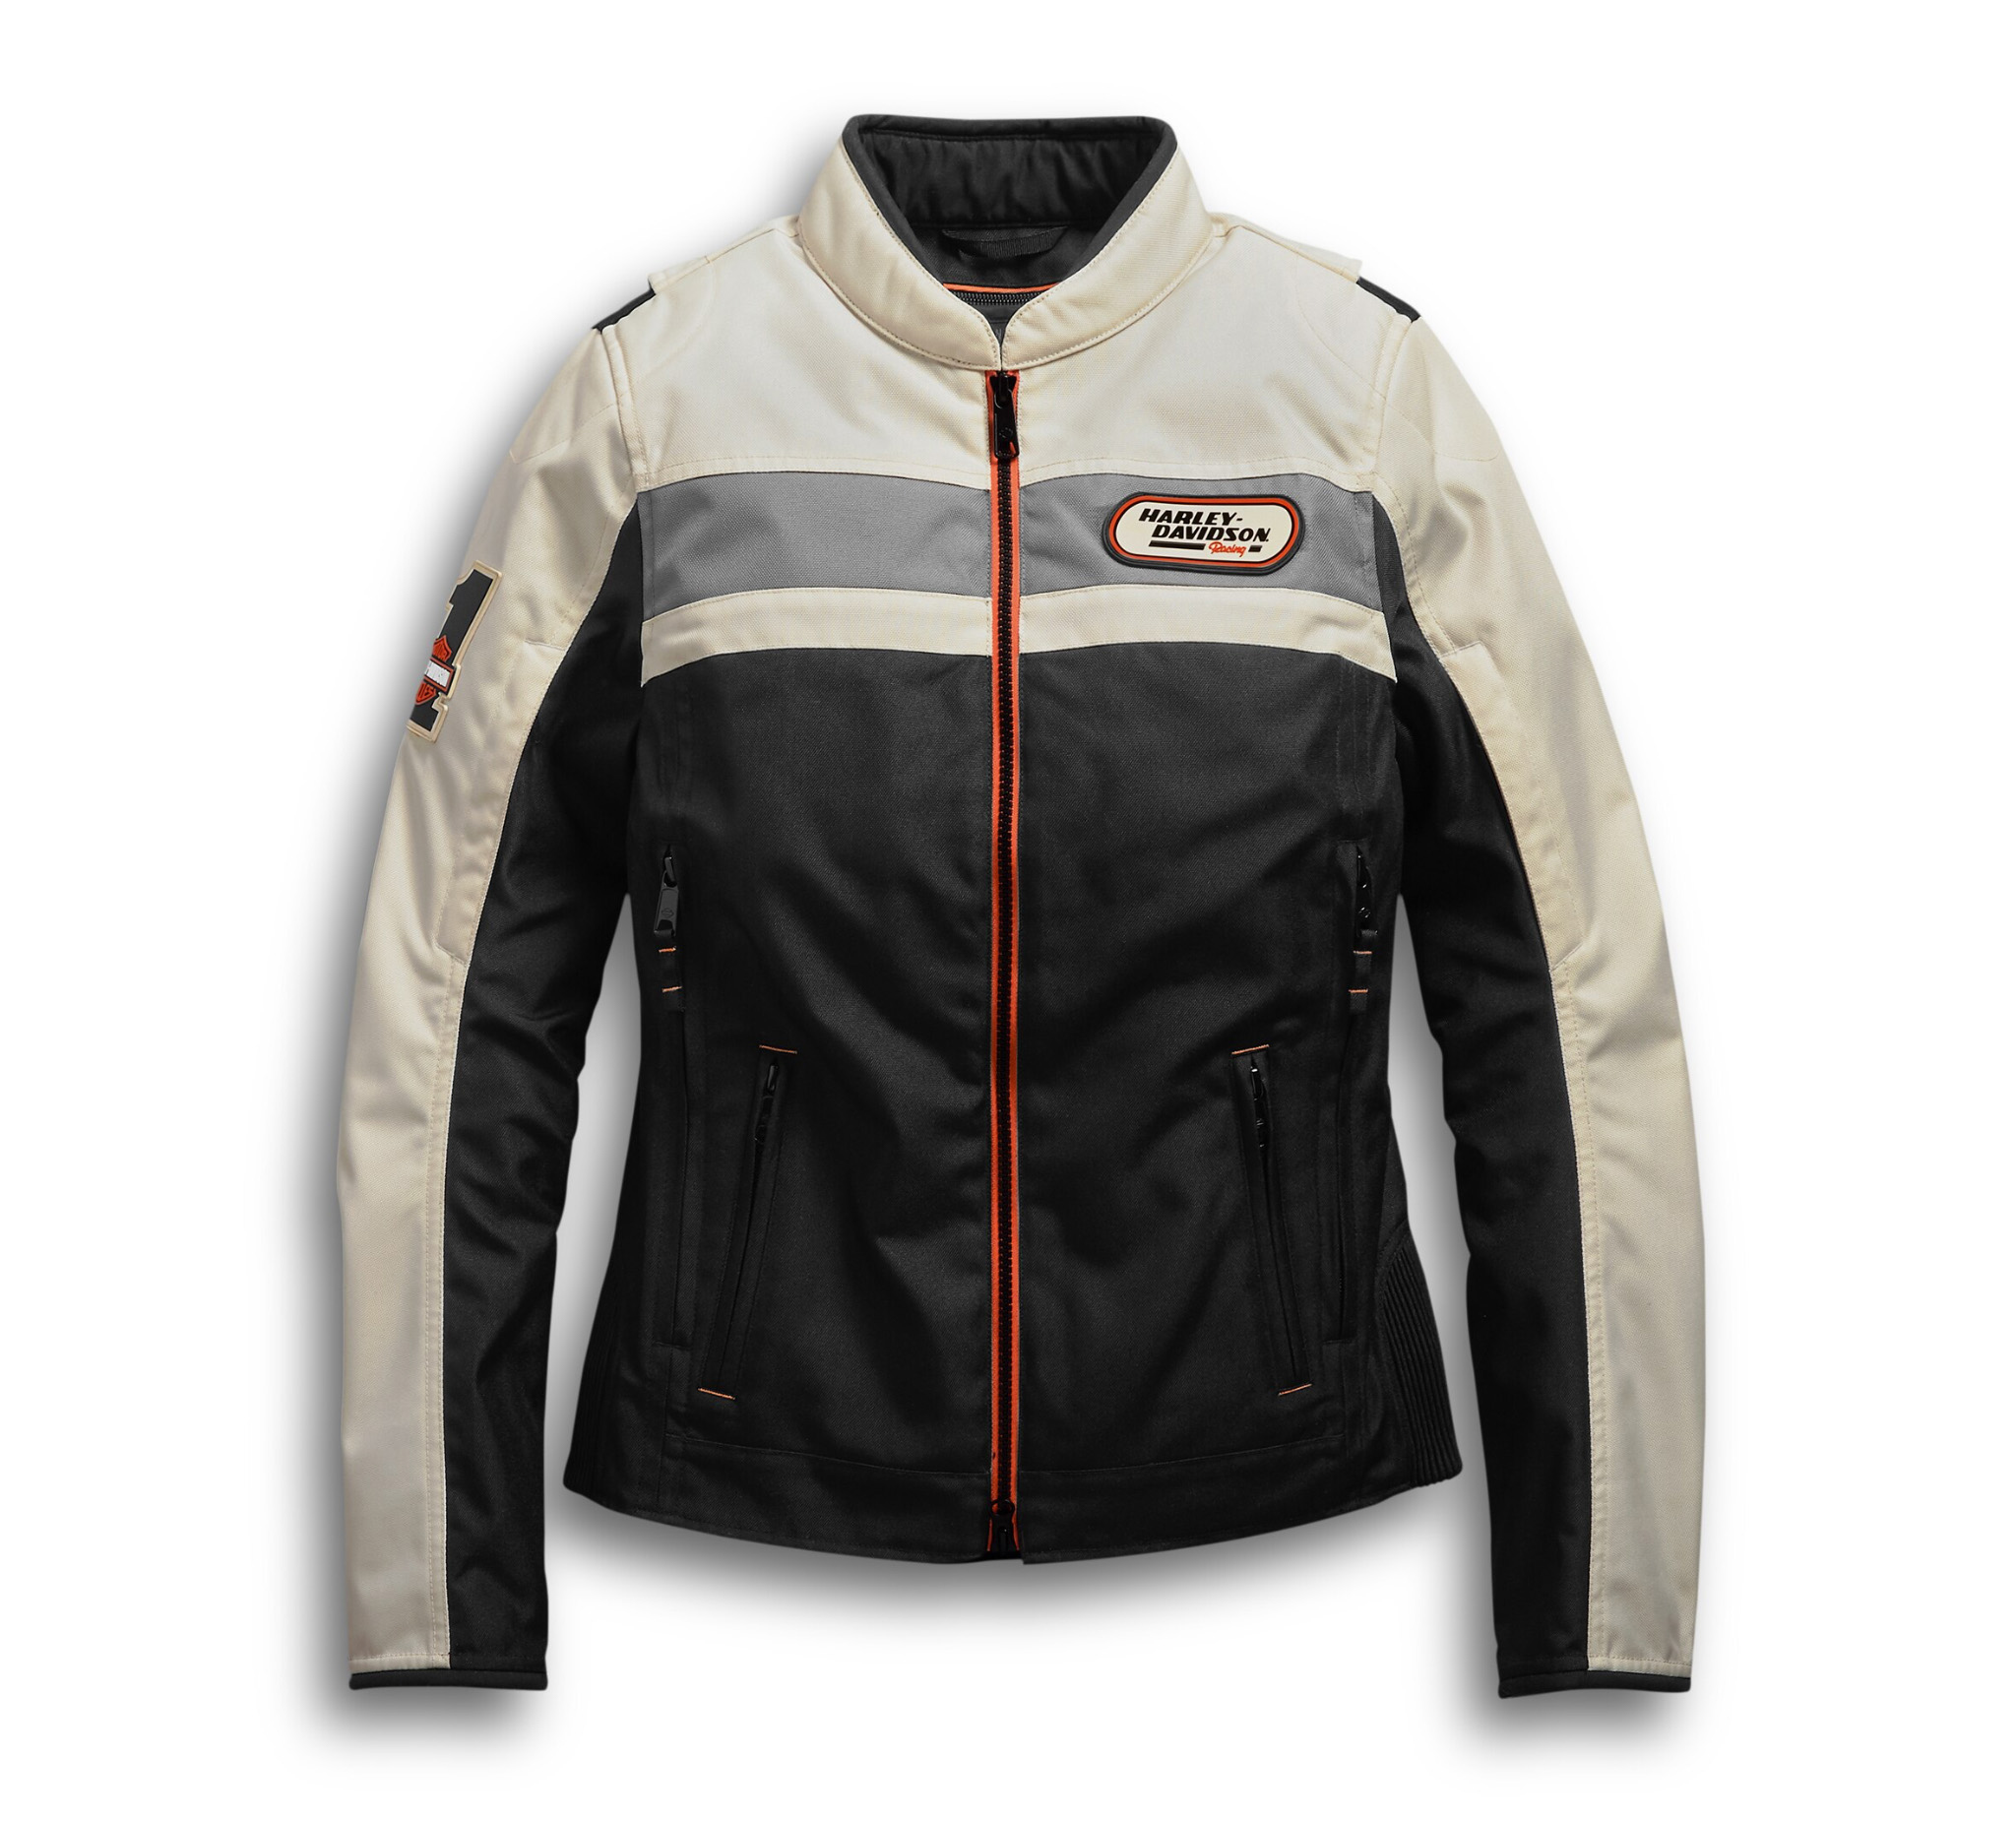 Harley-Davidson Women's 120th Anniversary Cafe Racer Leather Jacket, Bright White - 2XL